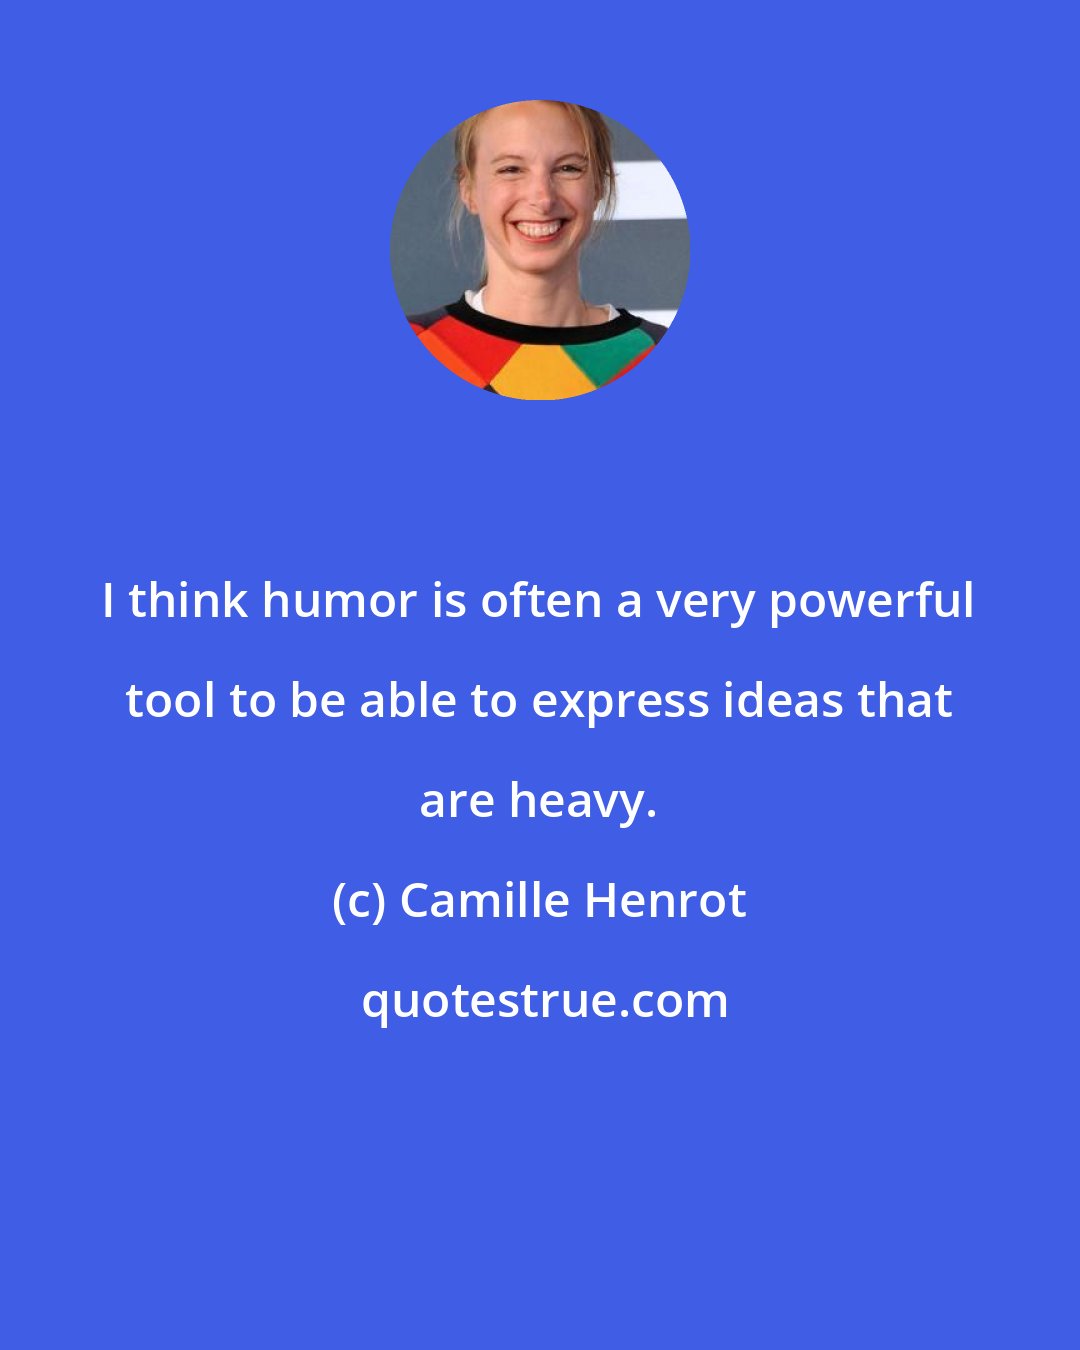 Camille Henrot: I think humor is often a very powerful tool to be able to express ideas that are heavy.